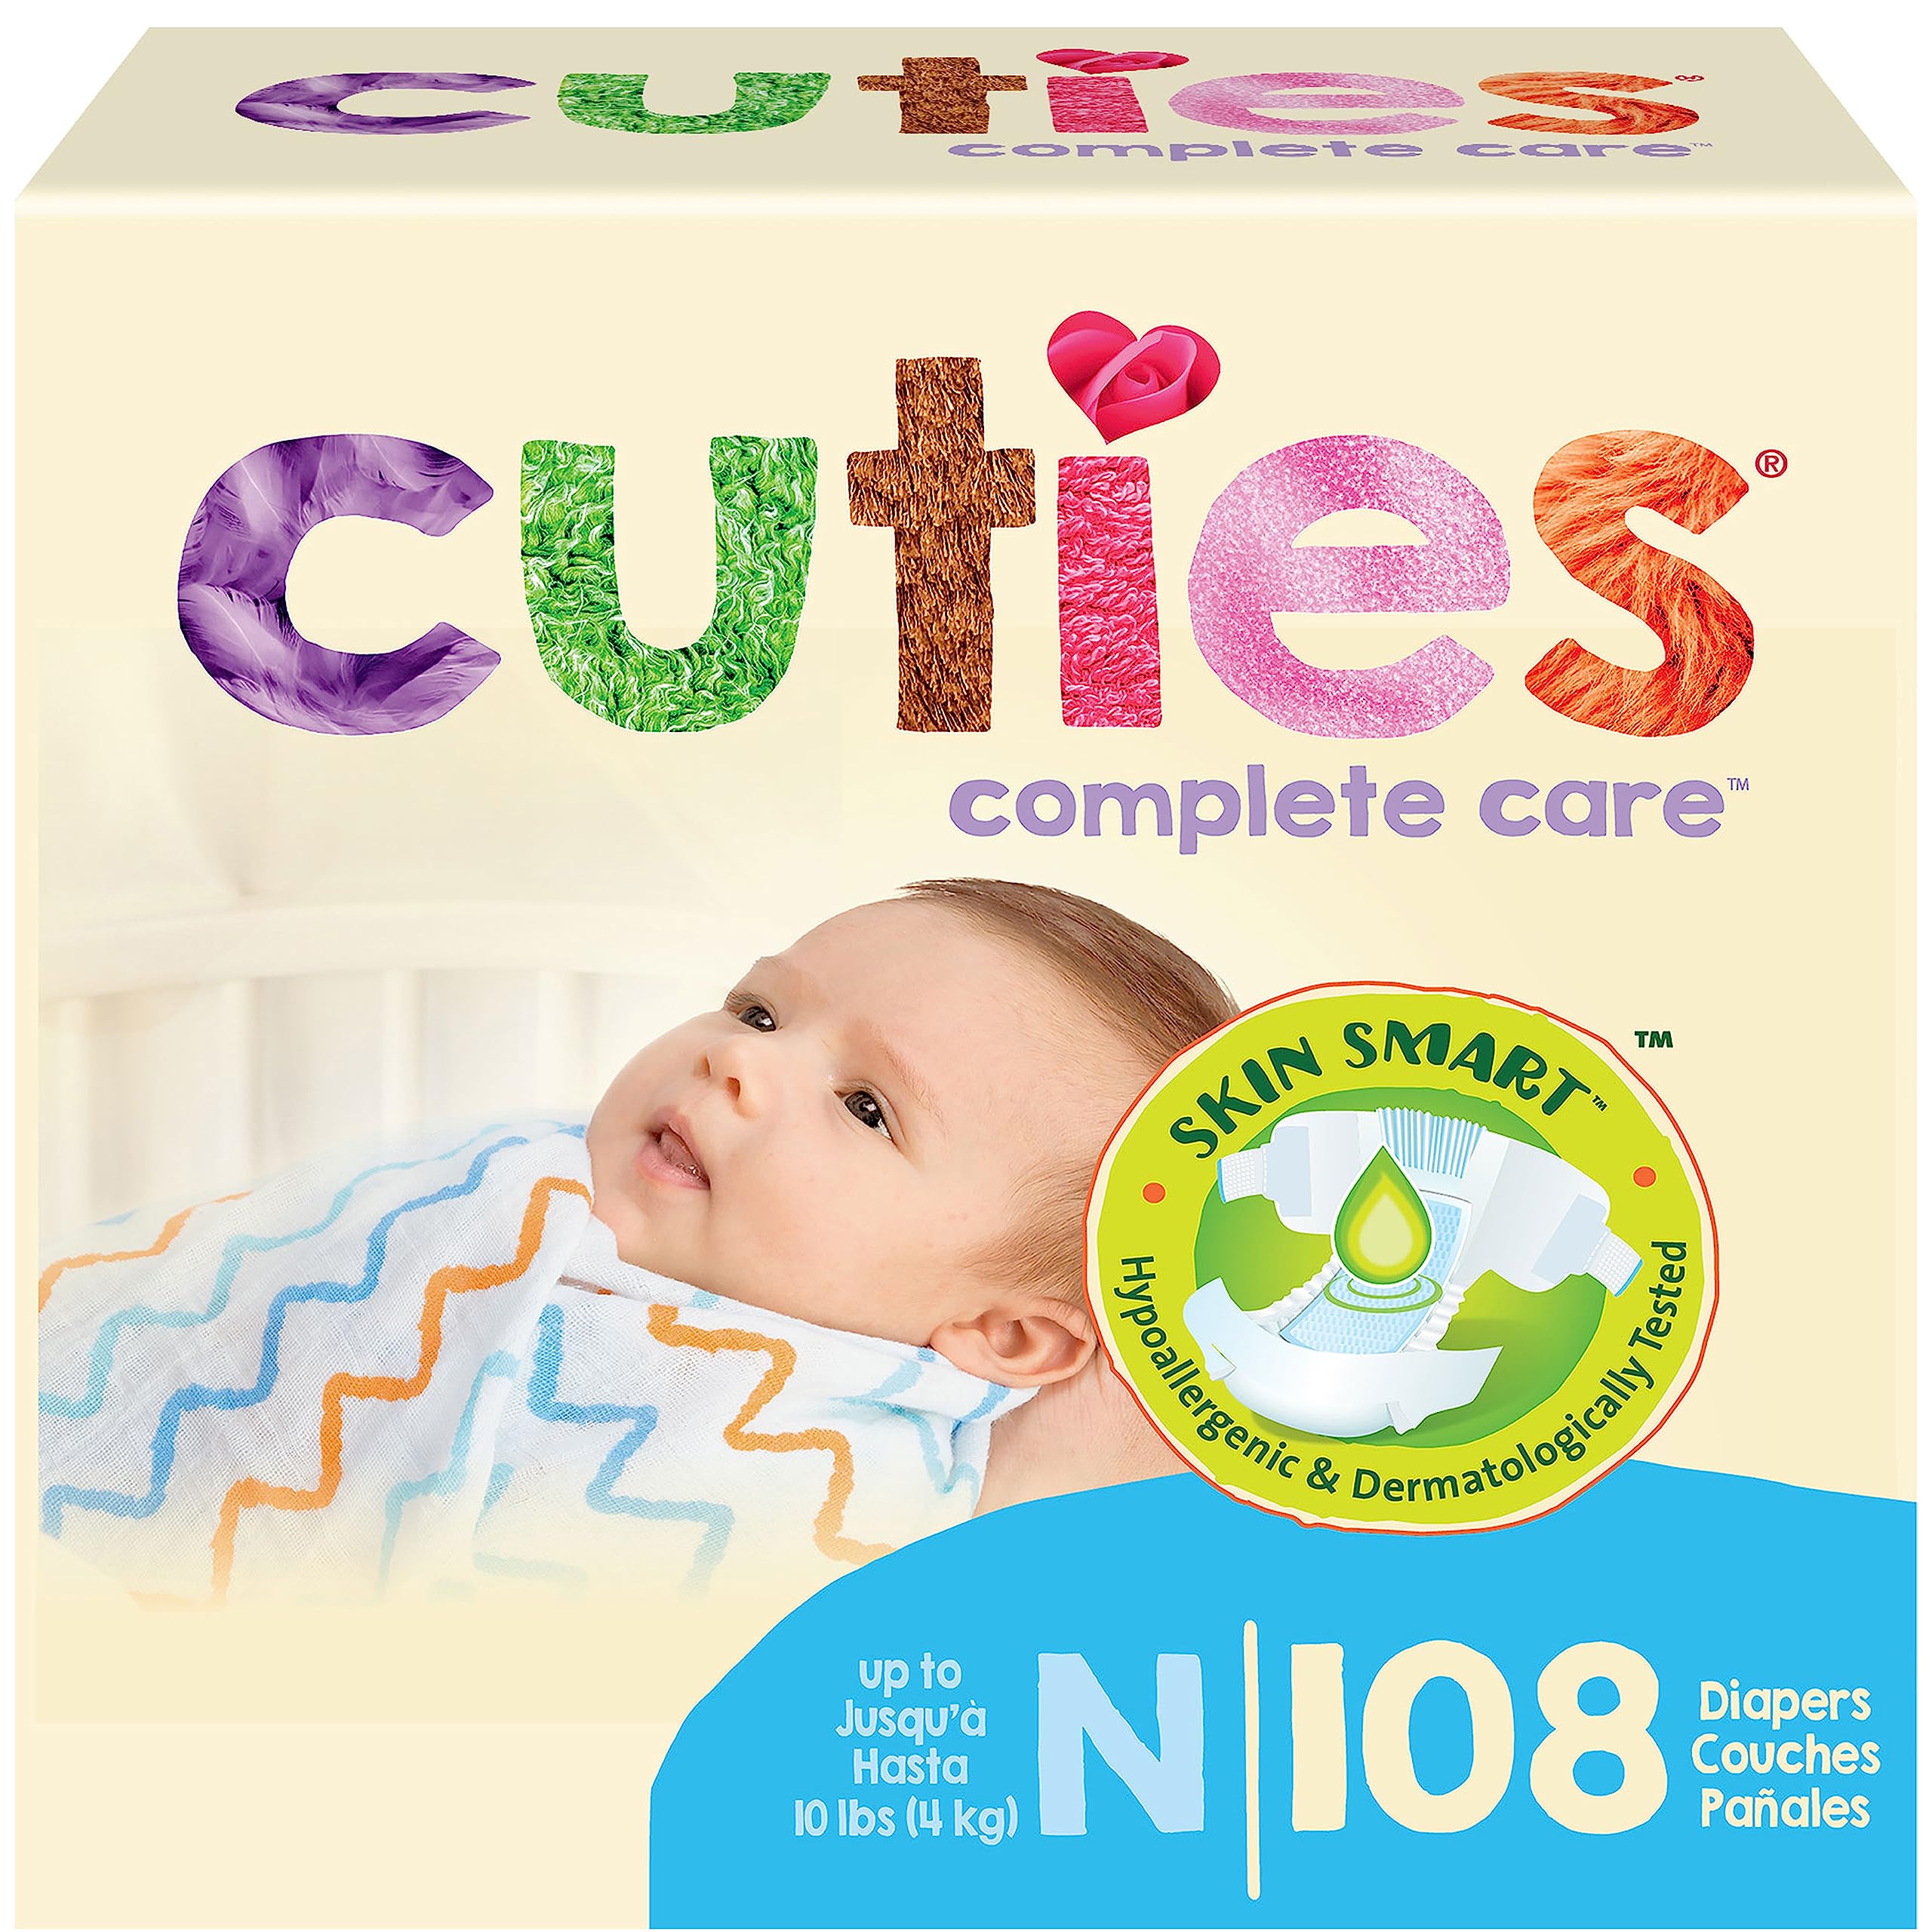 Cuties | Skin Smart, Absorbent & Hypoallergenic Diapers with Flexible & Secure Tabs | Size Newborn | 108 Count